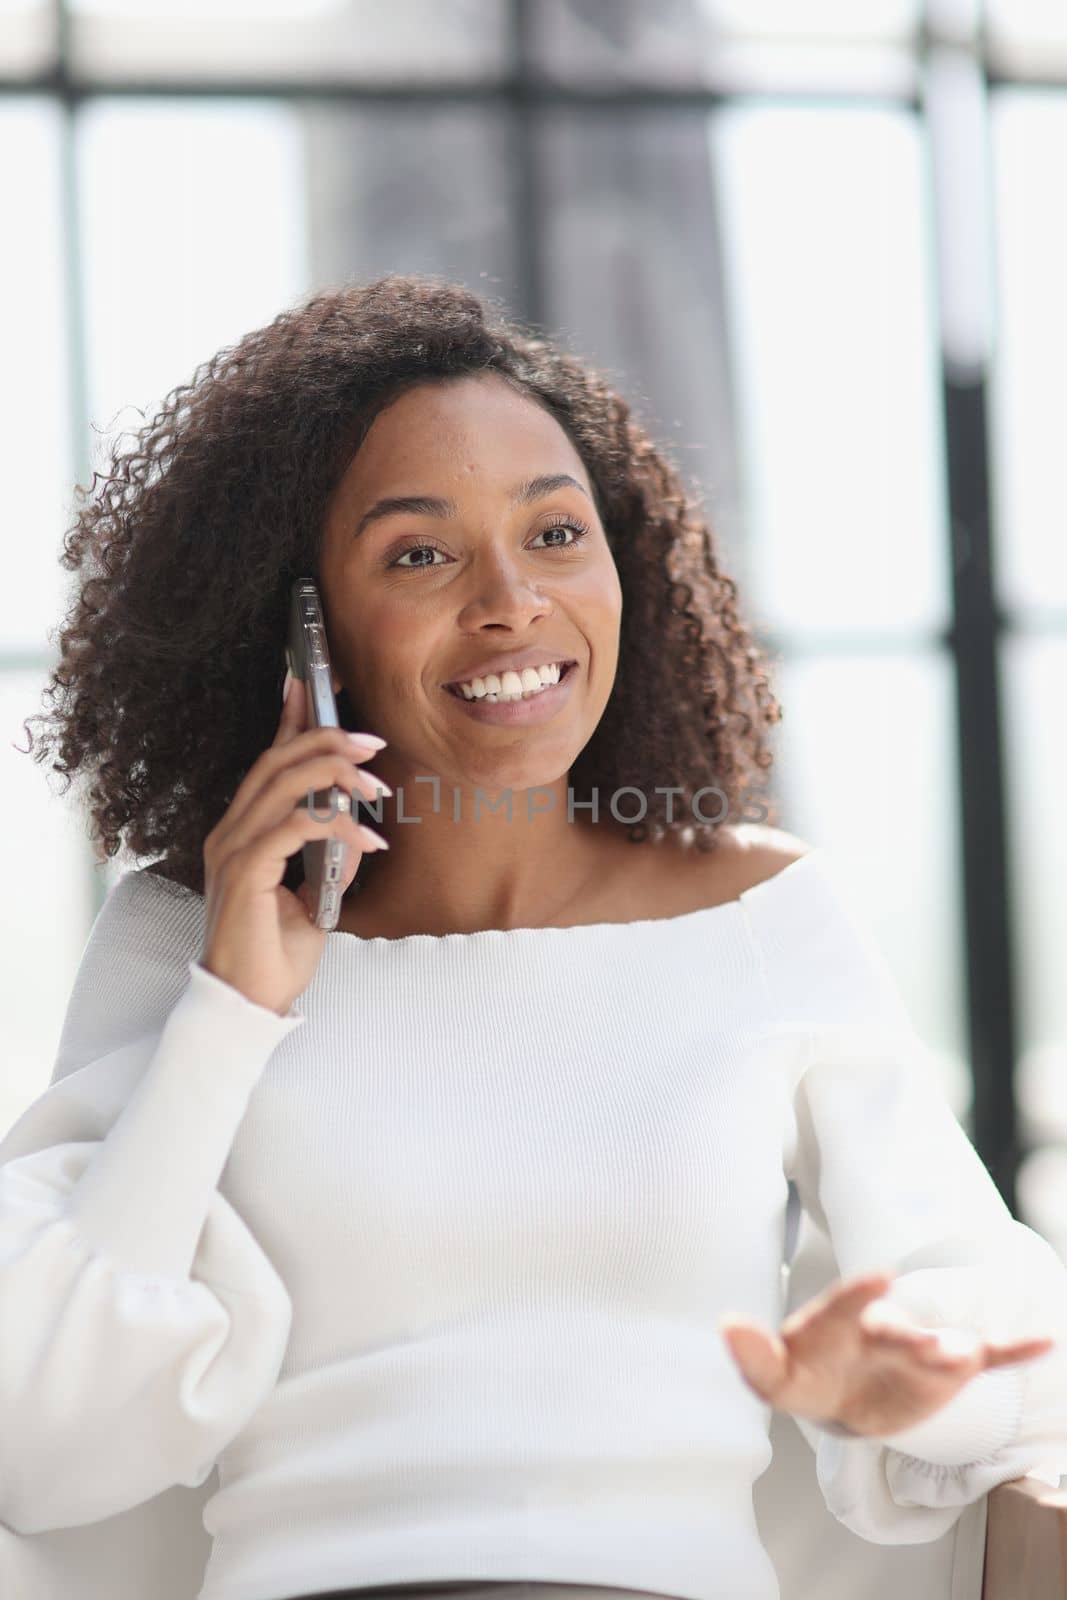 Portrait of a young African American woman using a smartphone